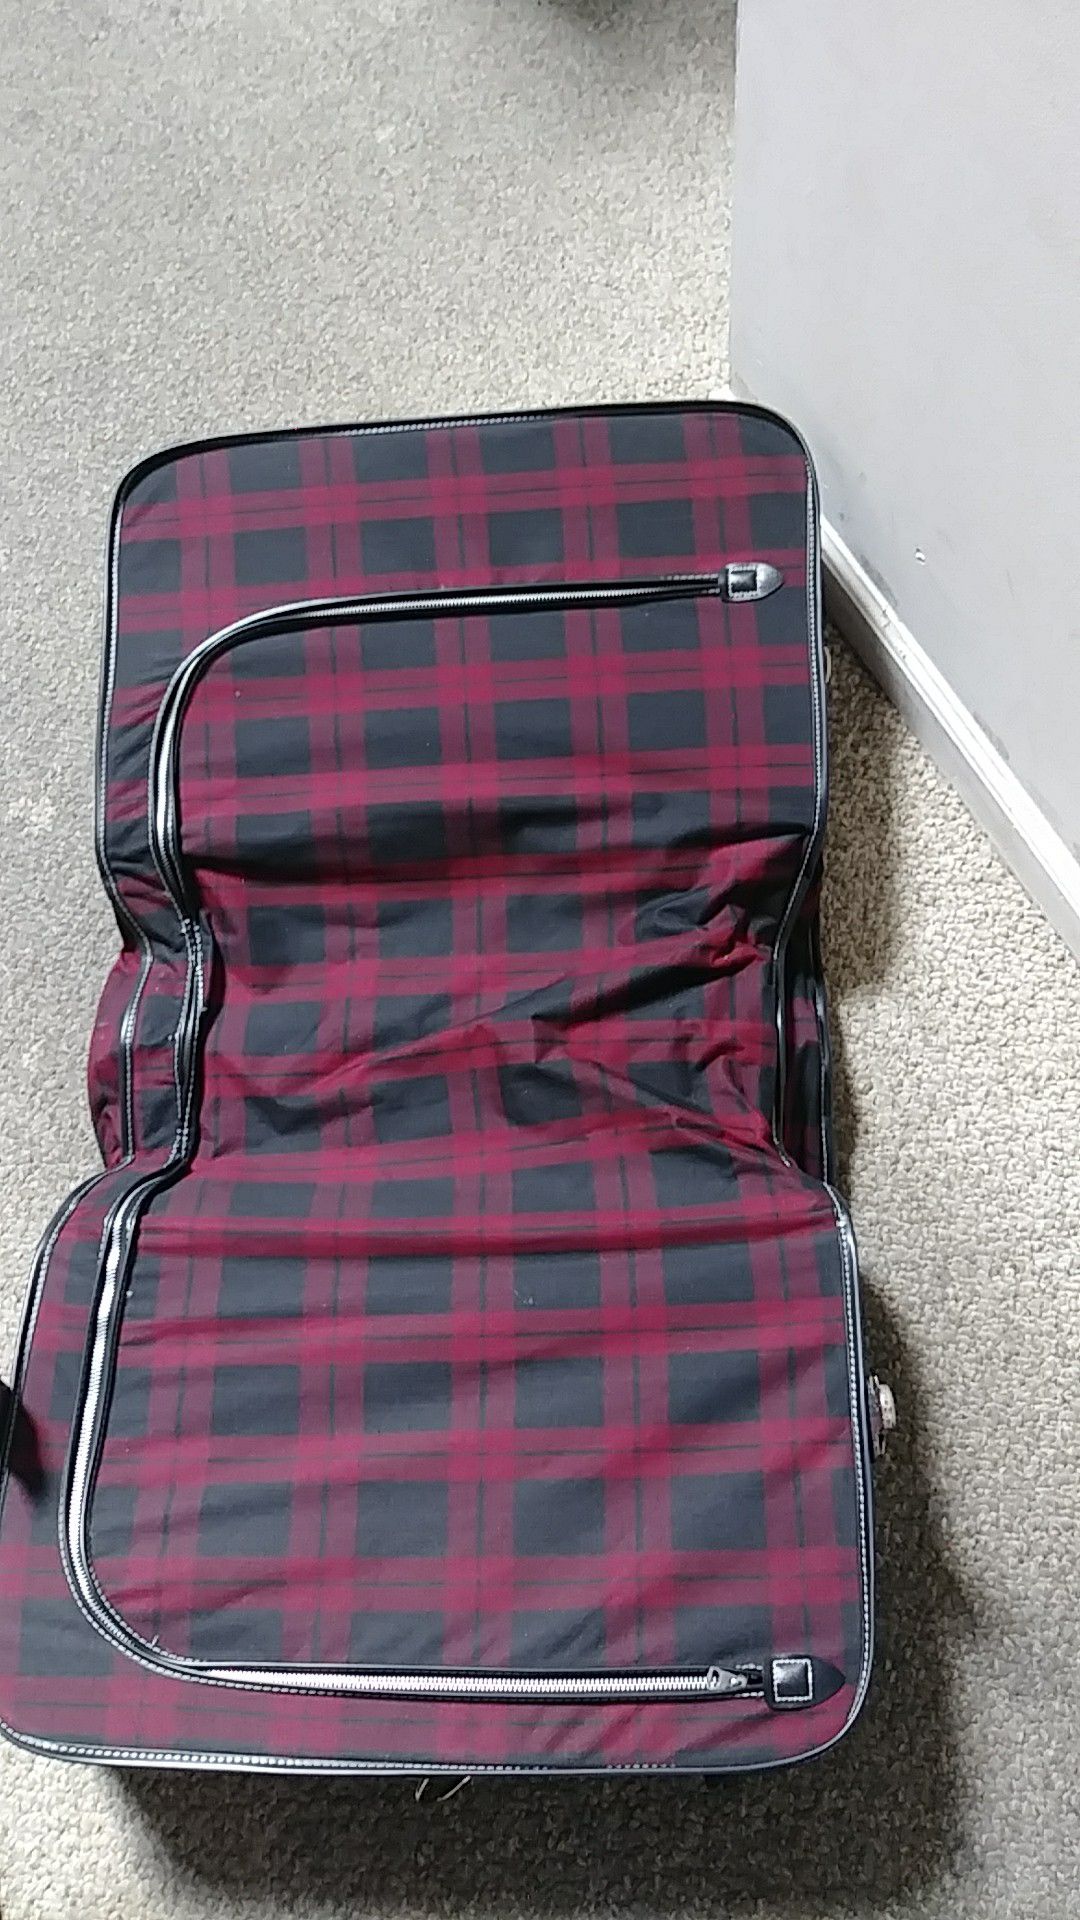 Foldable traveling suitbag / suit case with keys!